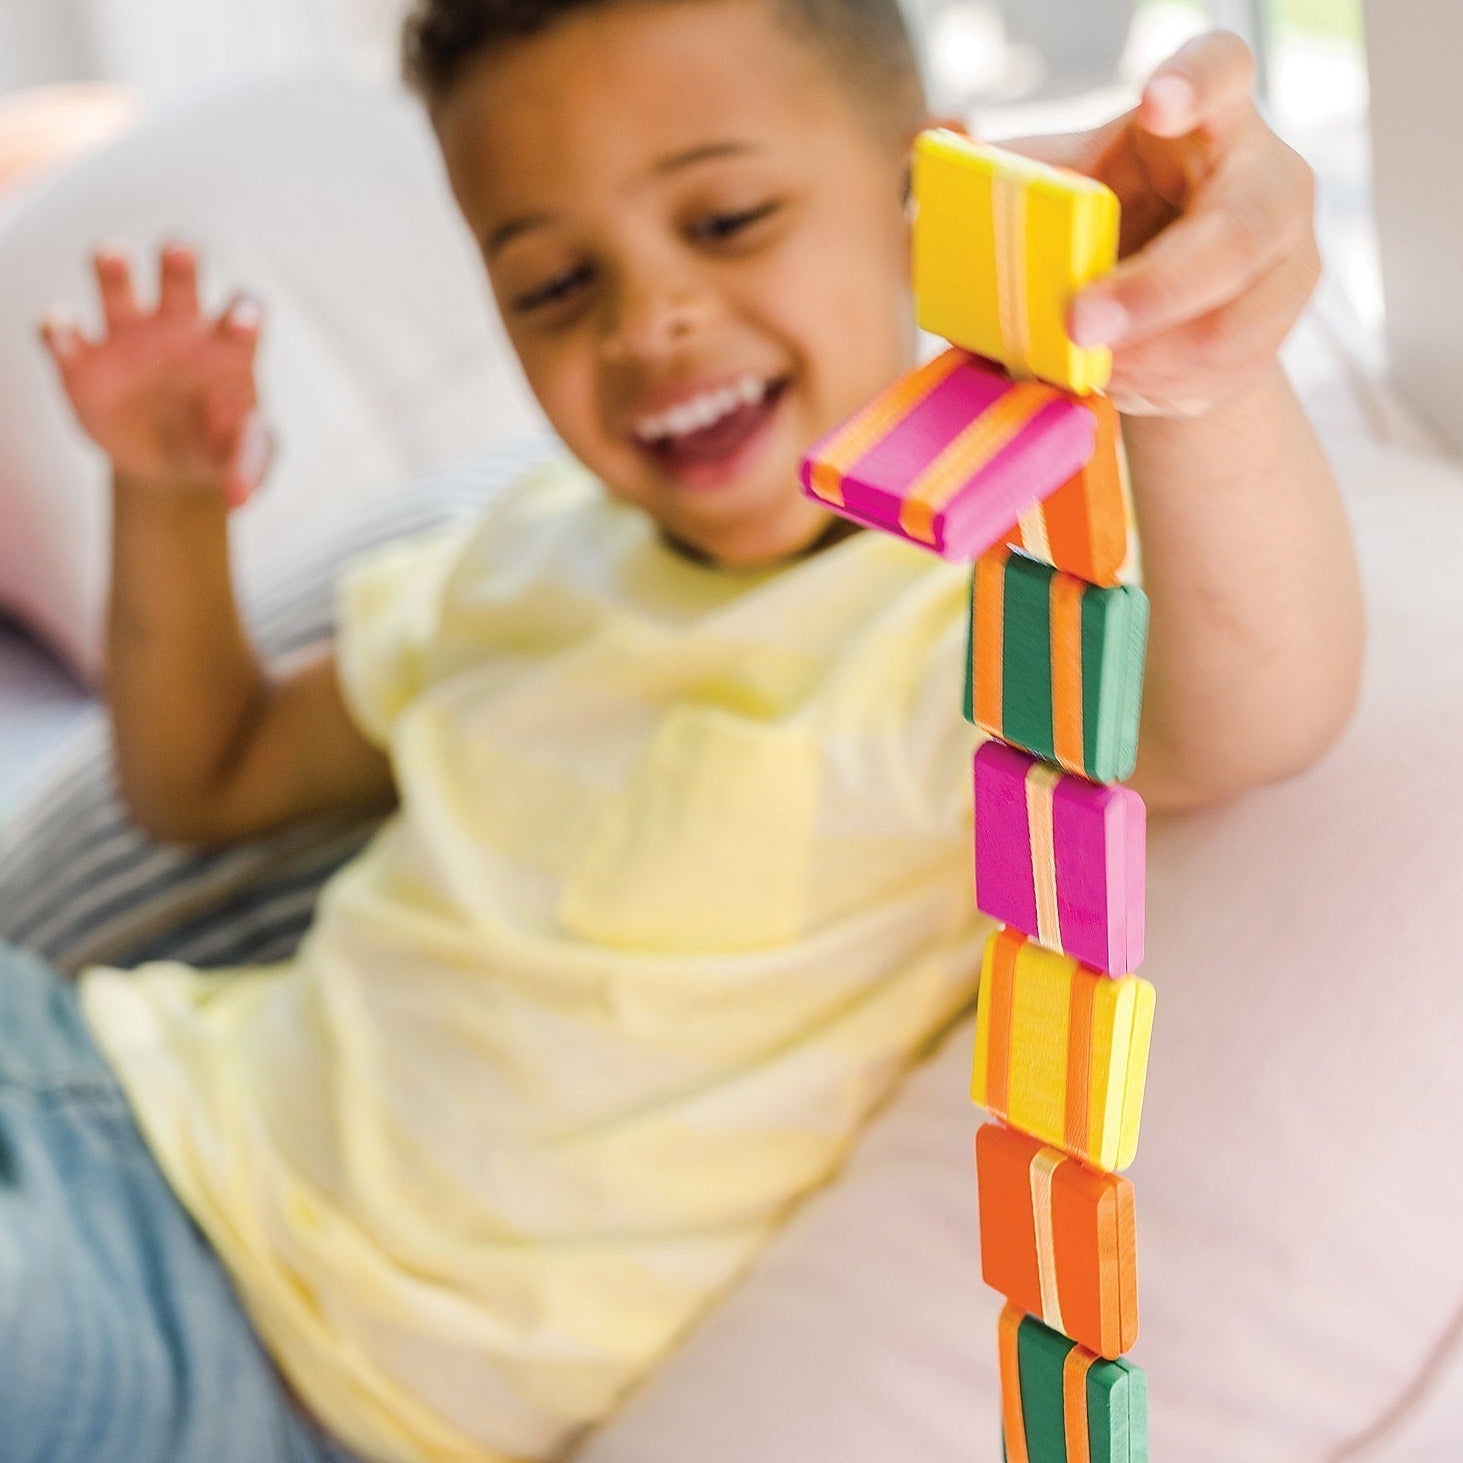 Jacobs Ladder, The Colourful Jacobs Ladder is not just a toy, but a piece of interactive art that captivates the imagination. This ancient toy provides endless hands-on fun through its optical illusion and vibrant, colourful design. Made from wooden blocks connected by colourful ribbons, it offers both visual and tactile delight. Features Classic Yet Modern Brightly Coloured: Crafted from 2-inch square wood blocks painted in an array of colours to engage the visual senses. Traditional Design: An ancient toy